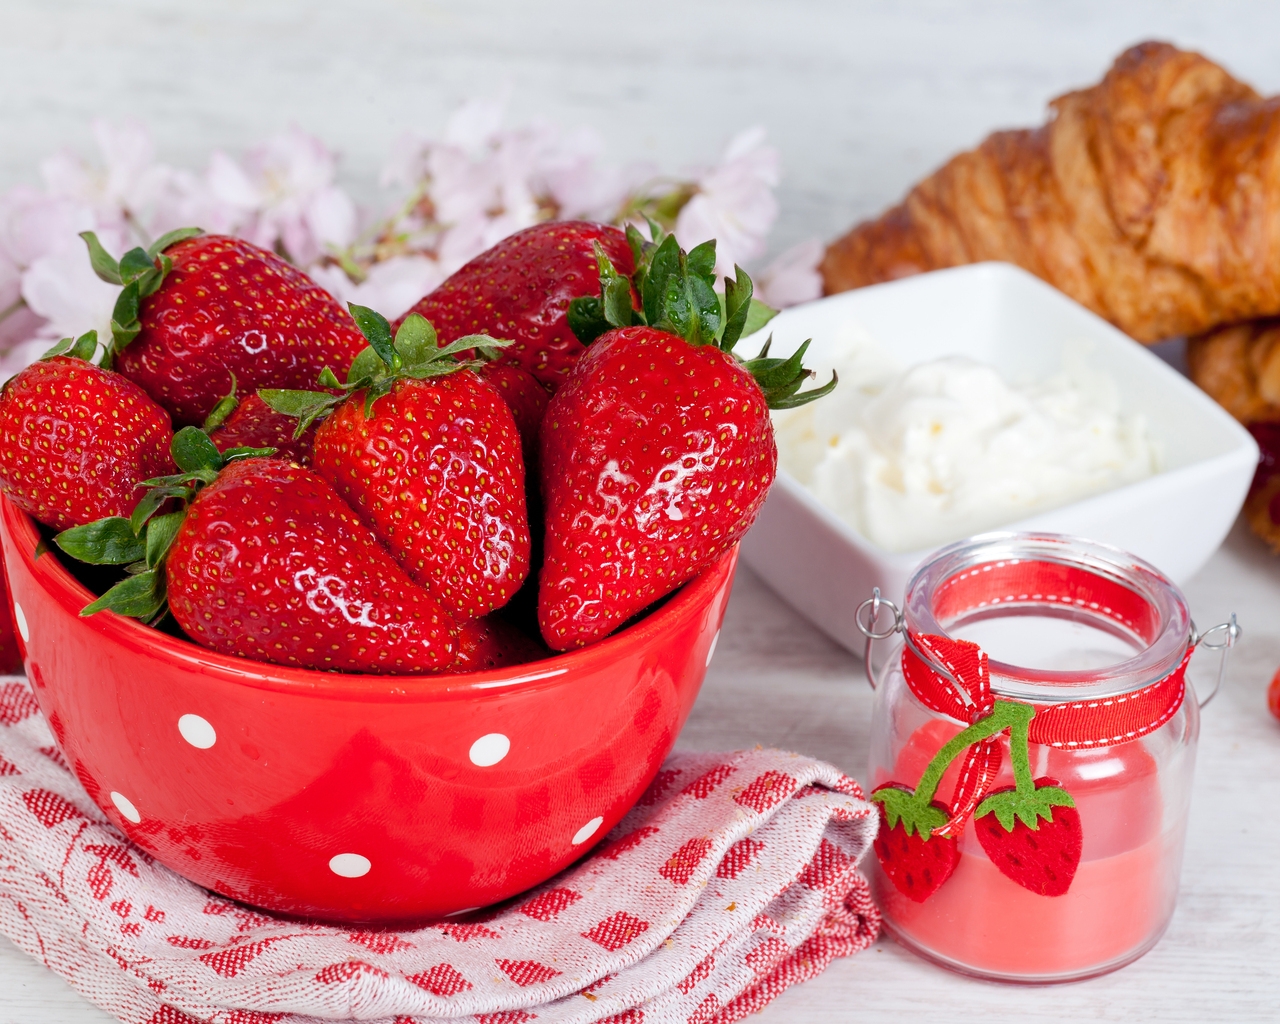 Strawberries and Sour Cream for 1280 x 1024 resolution